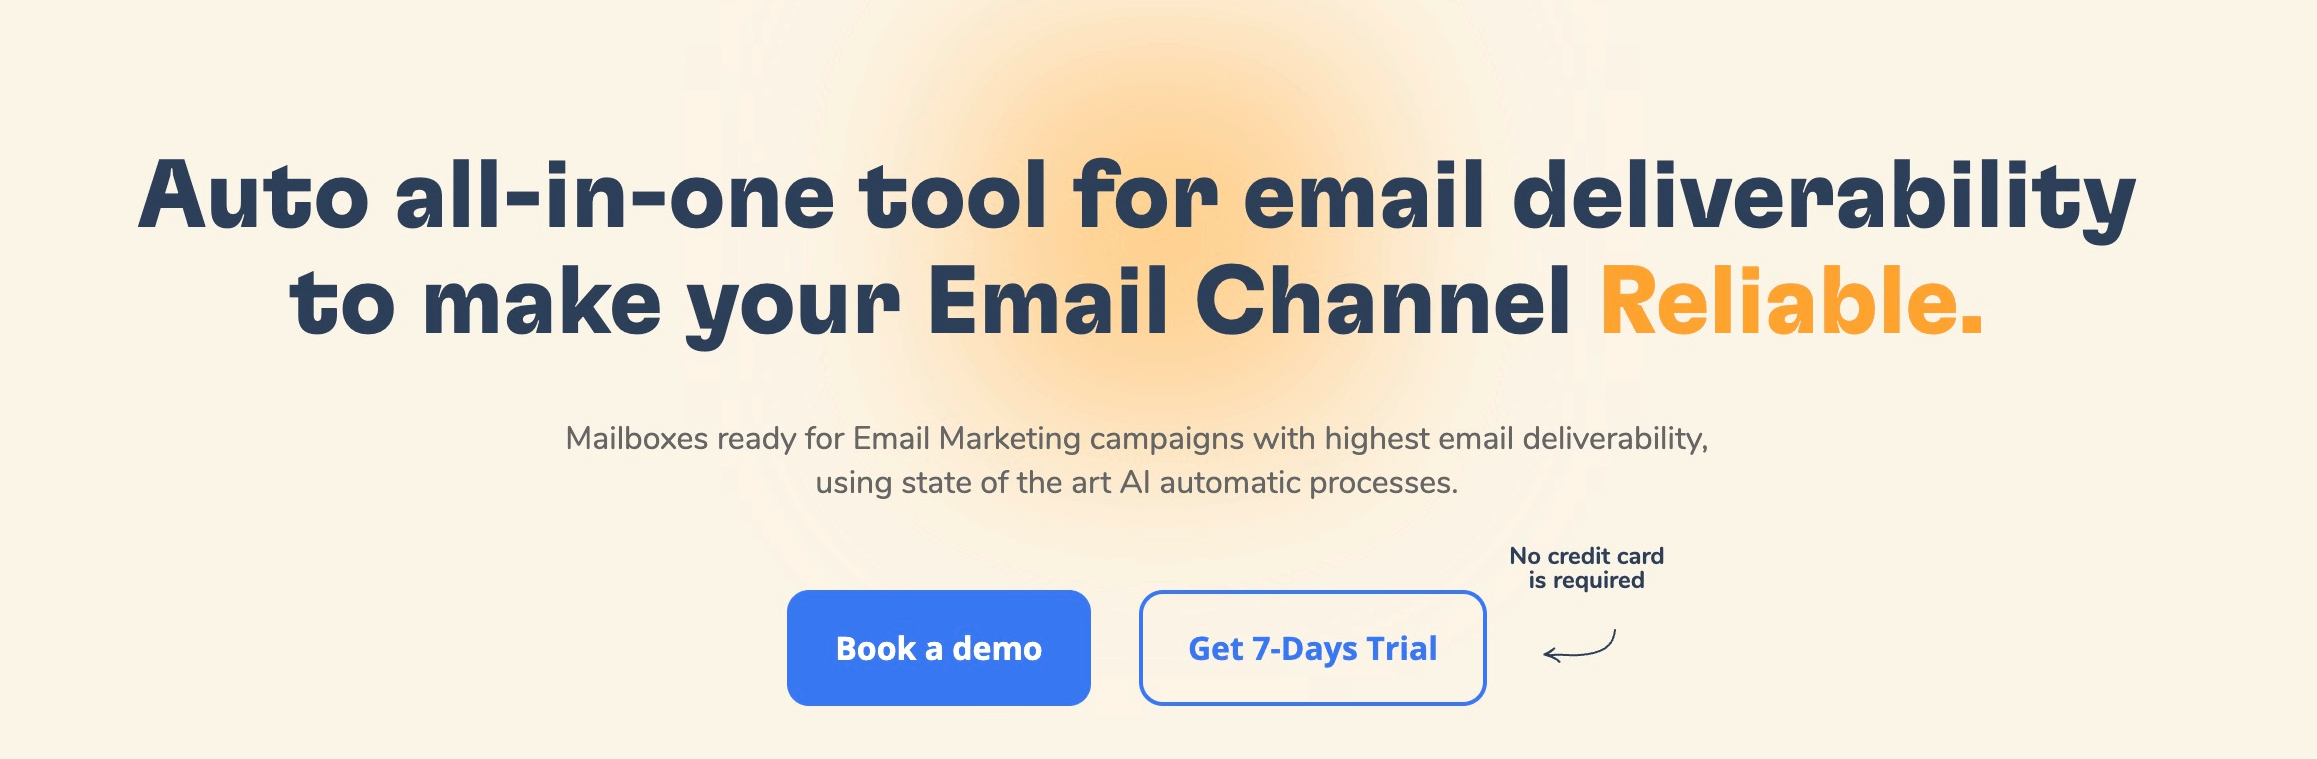 Warmy’s front page offers “auto all-in-one tool for email deliverability to make your email channel reliable”.